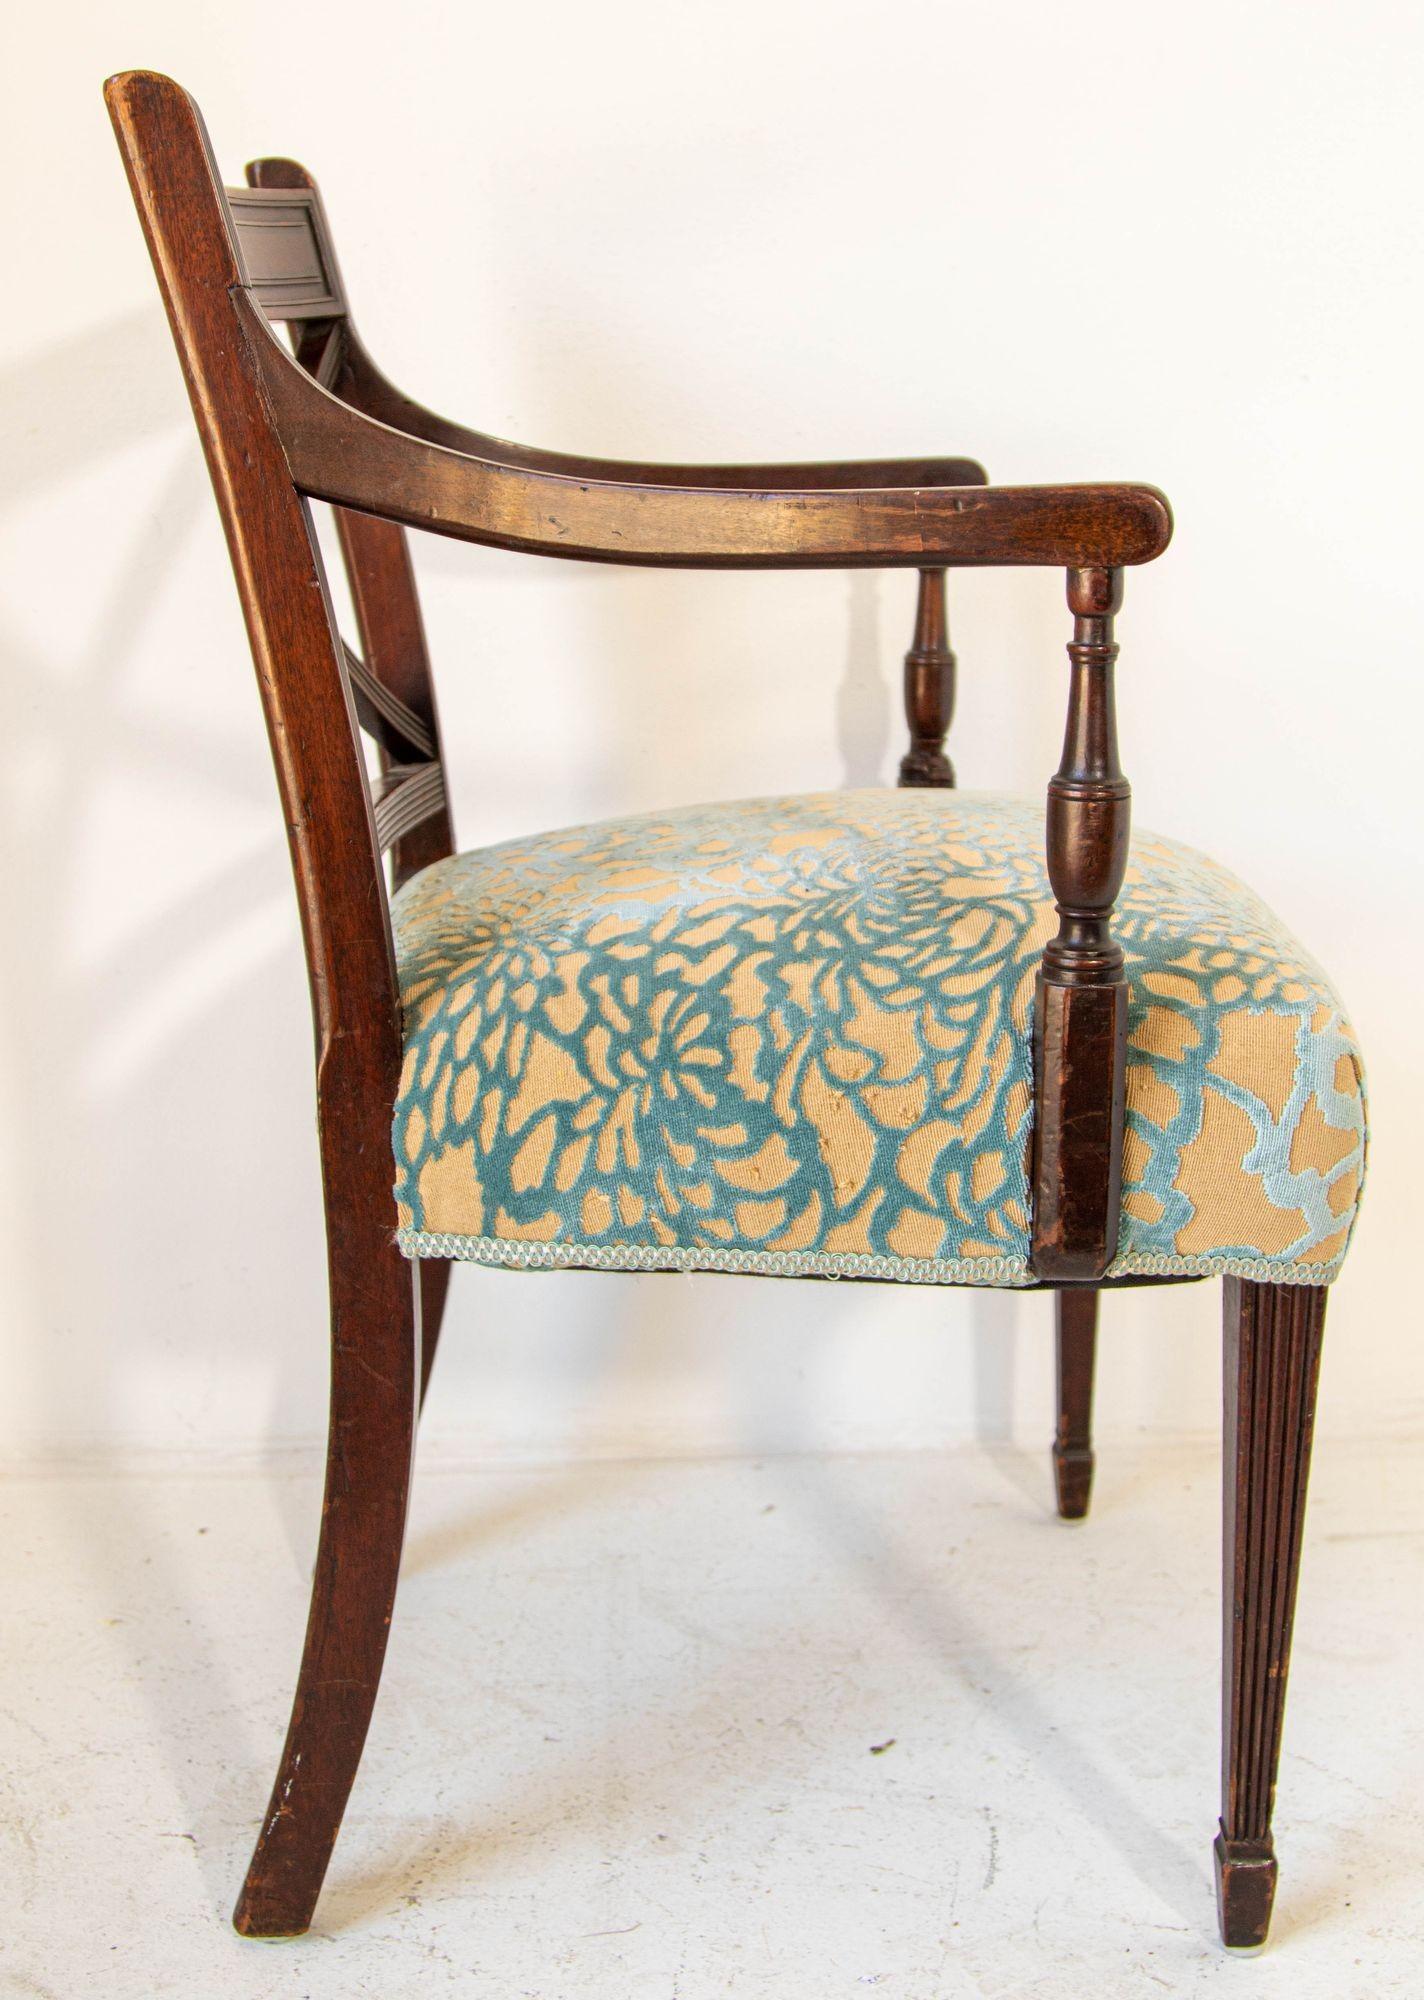 Hand-Crafted Vintage Carved Wood Side Chair Hollywood Regency English Style For Sale